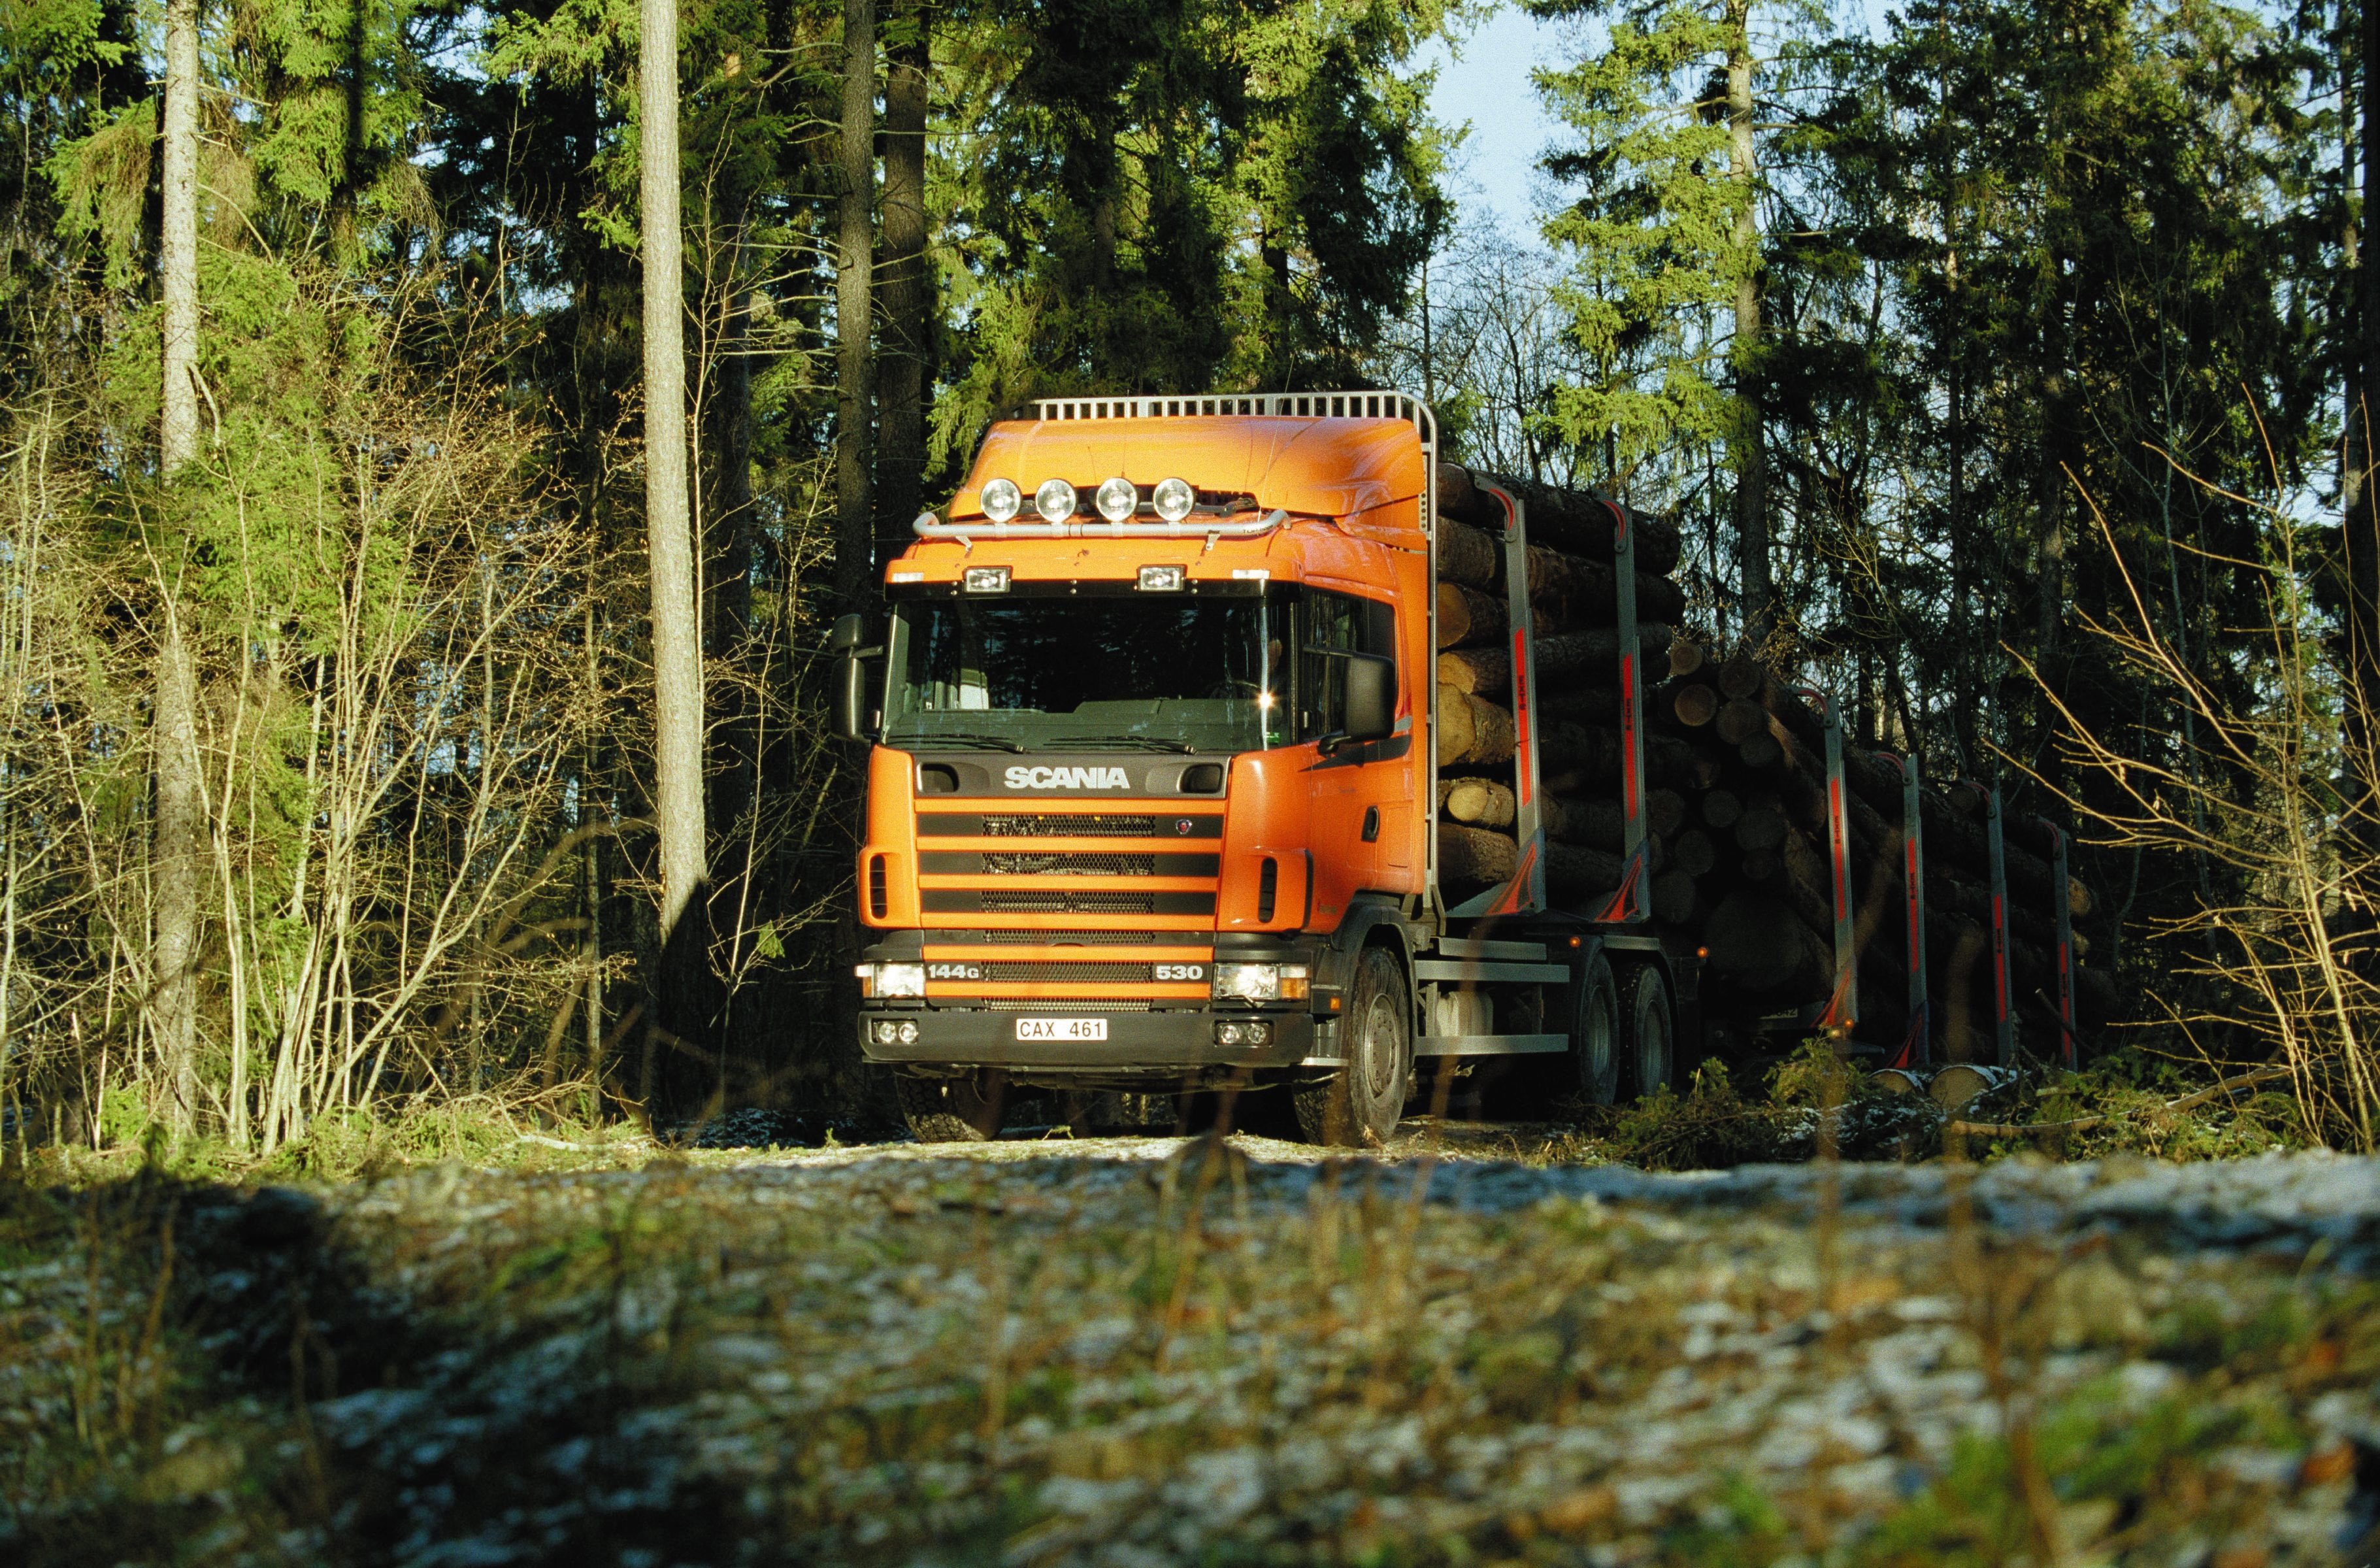 2004, Scania, R144g, 530, 6x4, Timber, Semi, Tractor Wallpaper